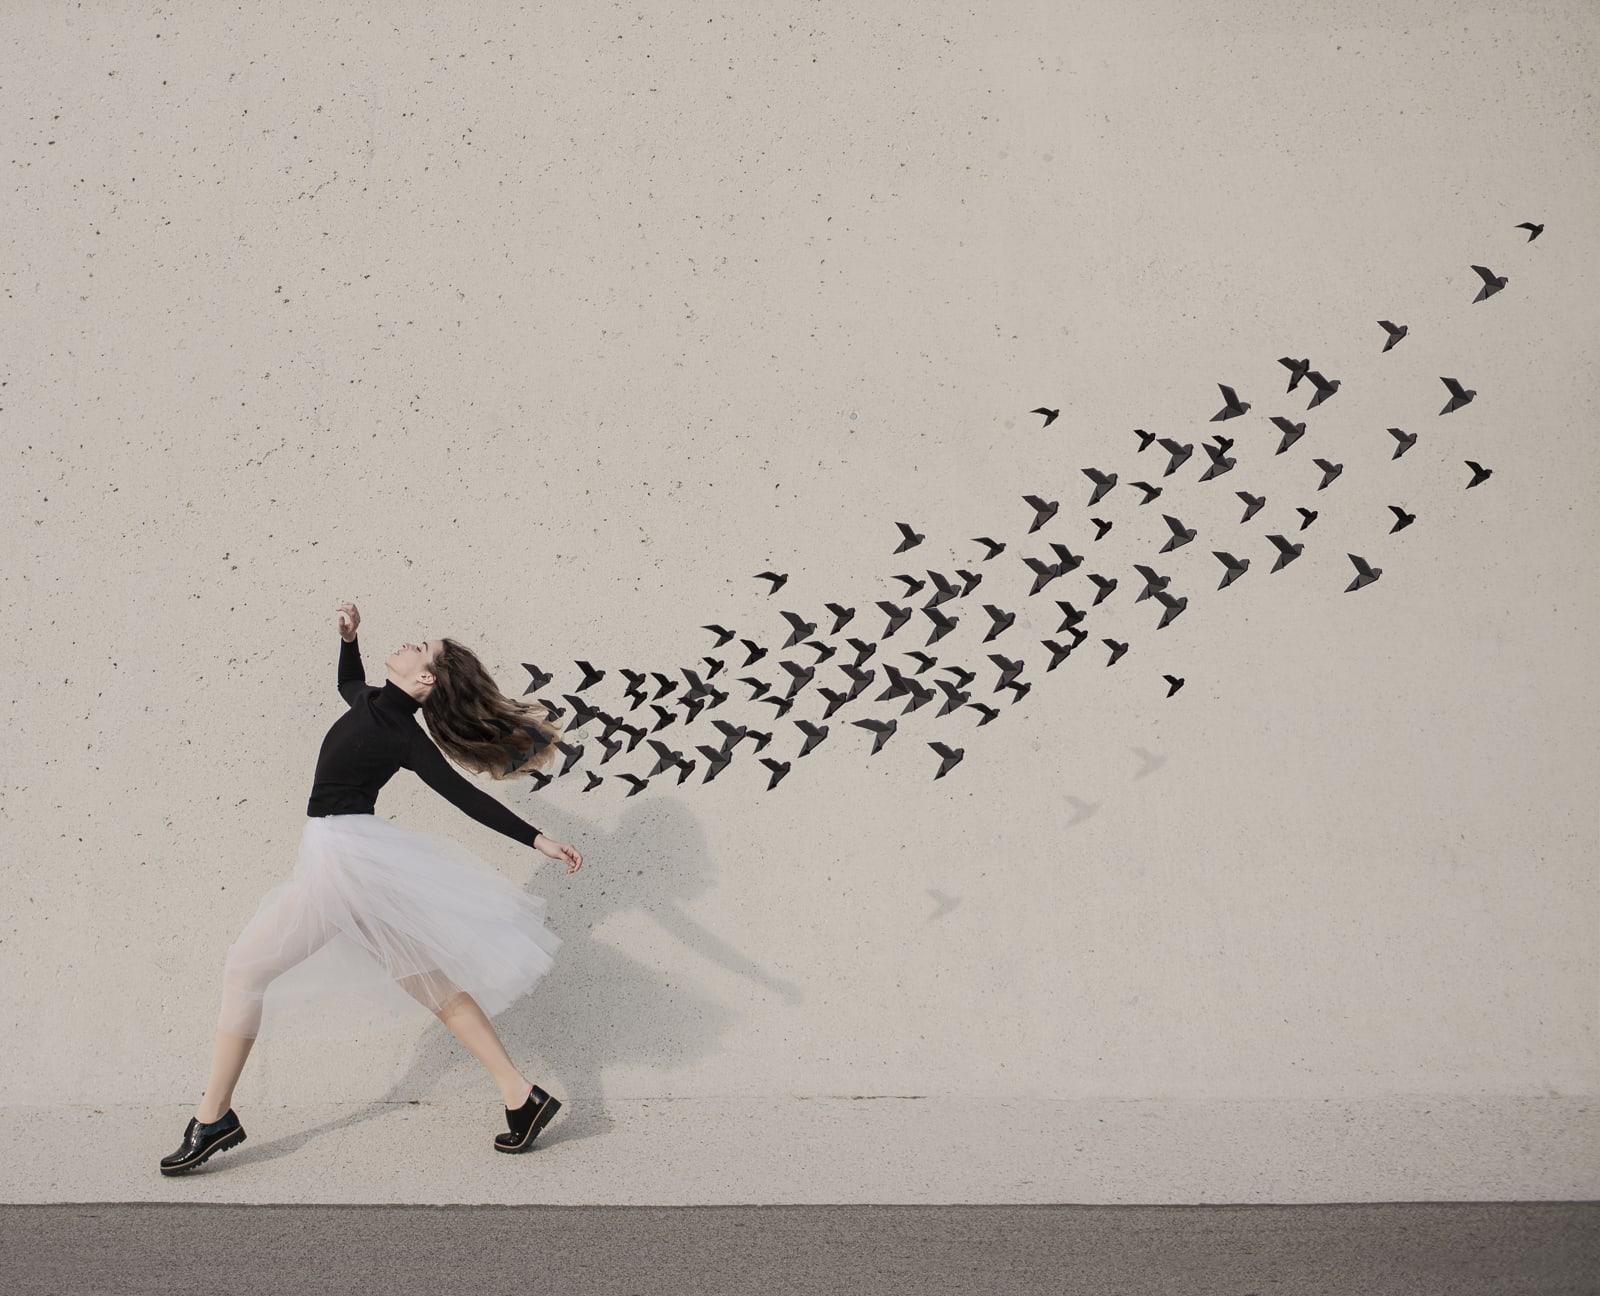 This surrealist portrait uses a minimalist palette of mostly black and white. The model is in mid flight as she dances through life. Hand-made origami birds trail behind her. This color photograph was shot in Vienna. This is a limited edition